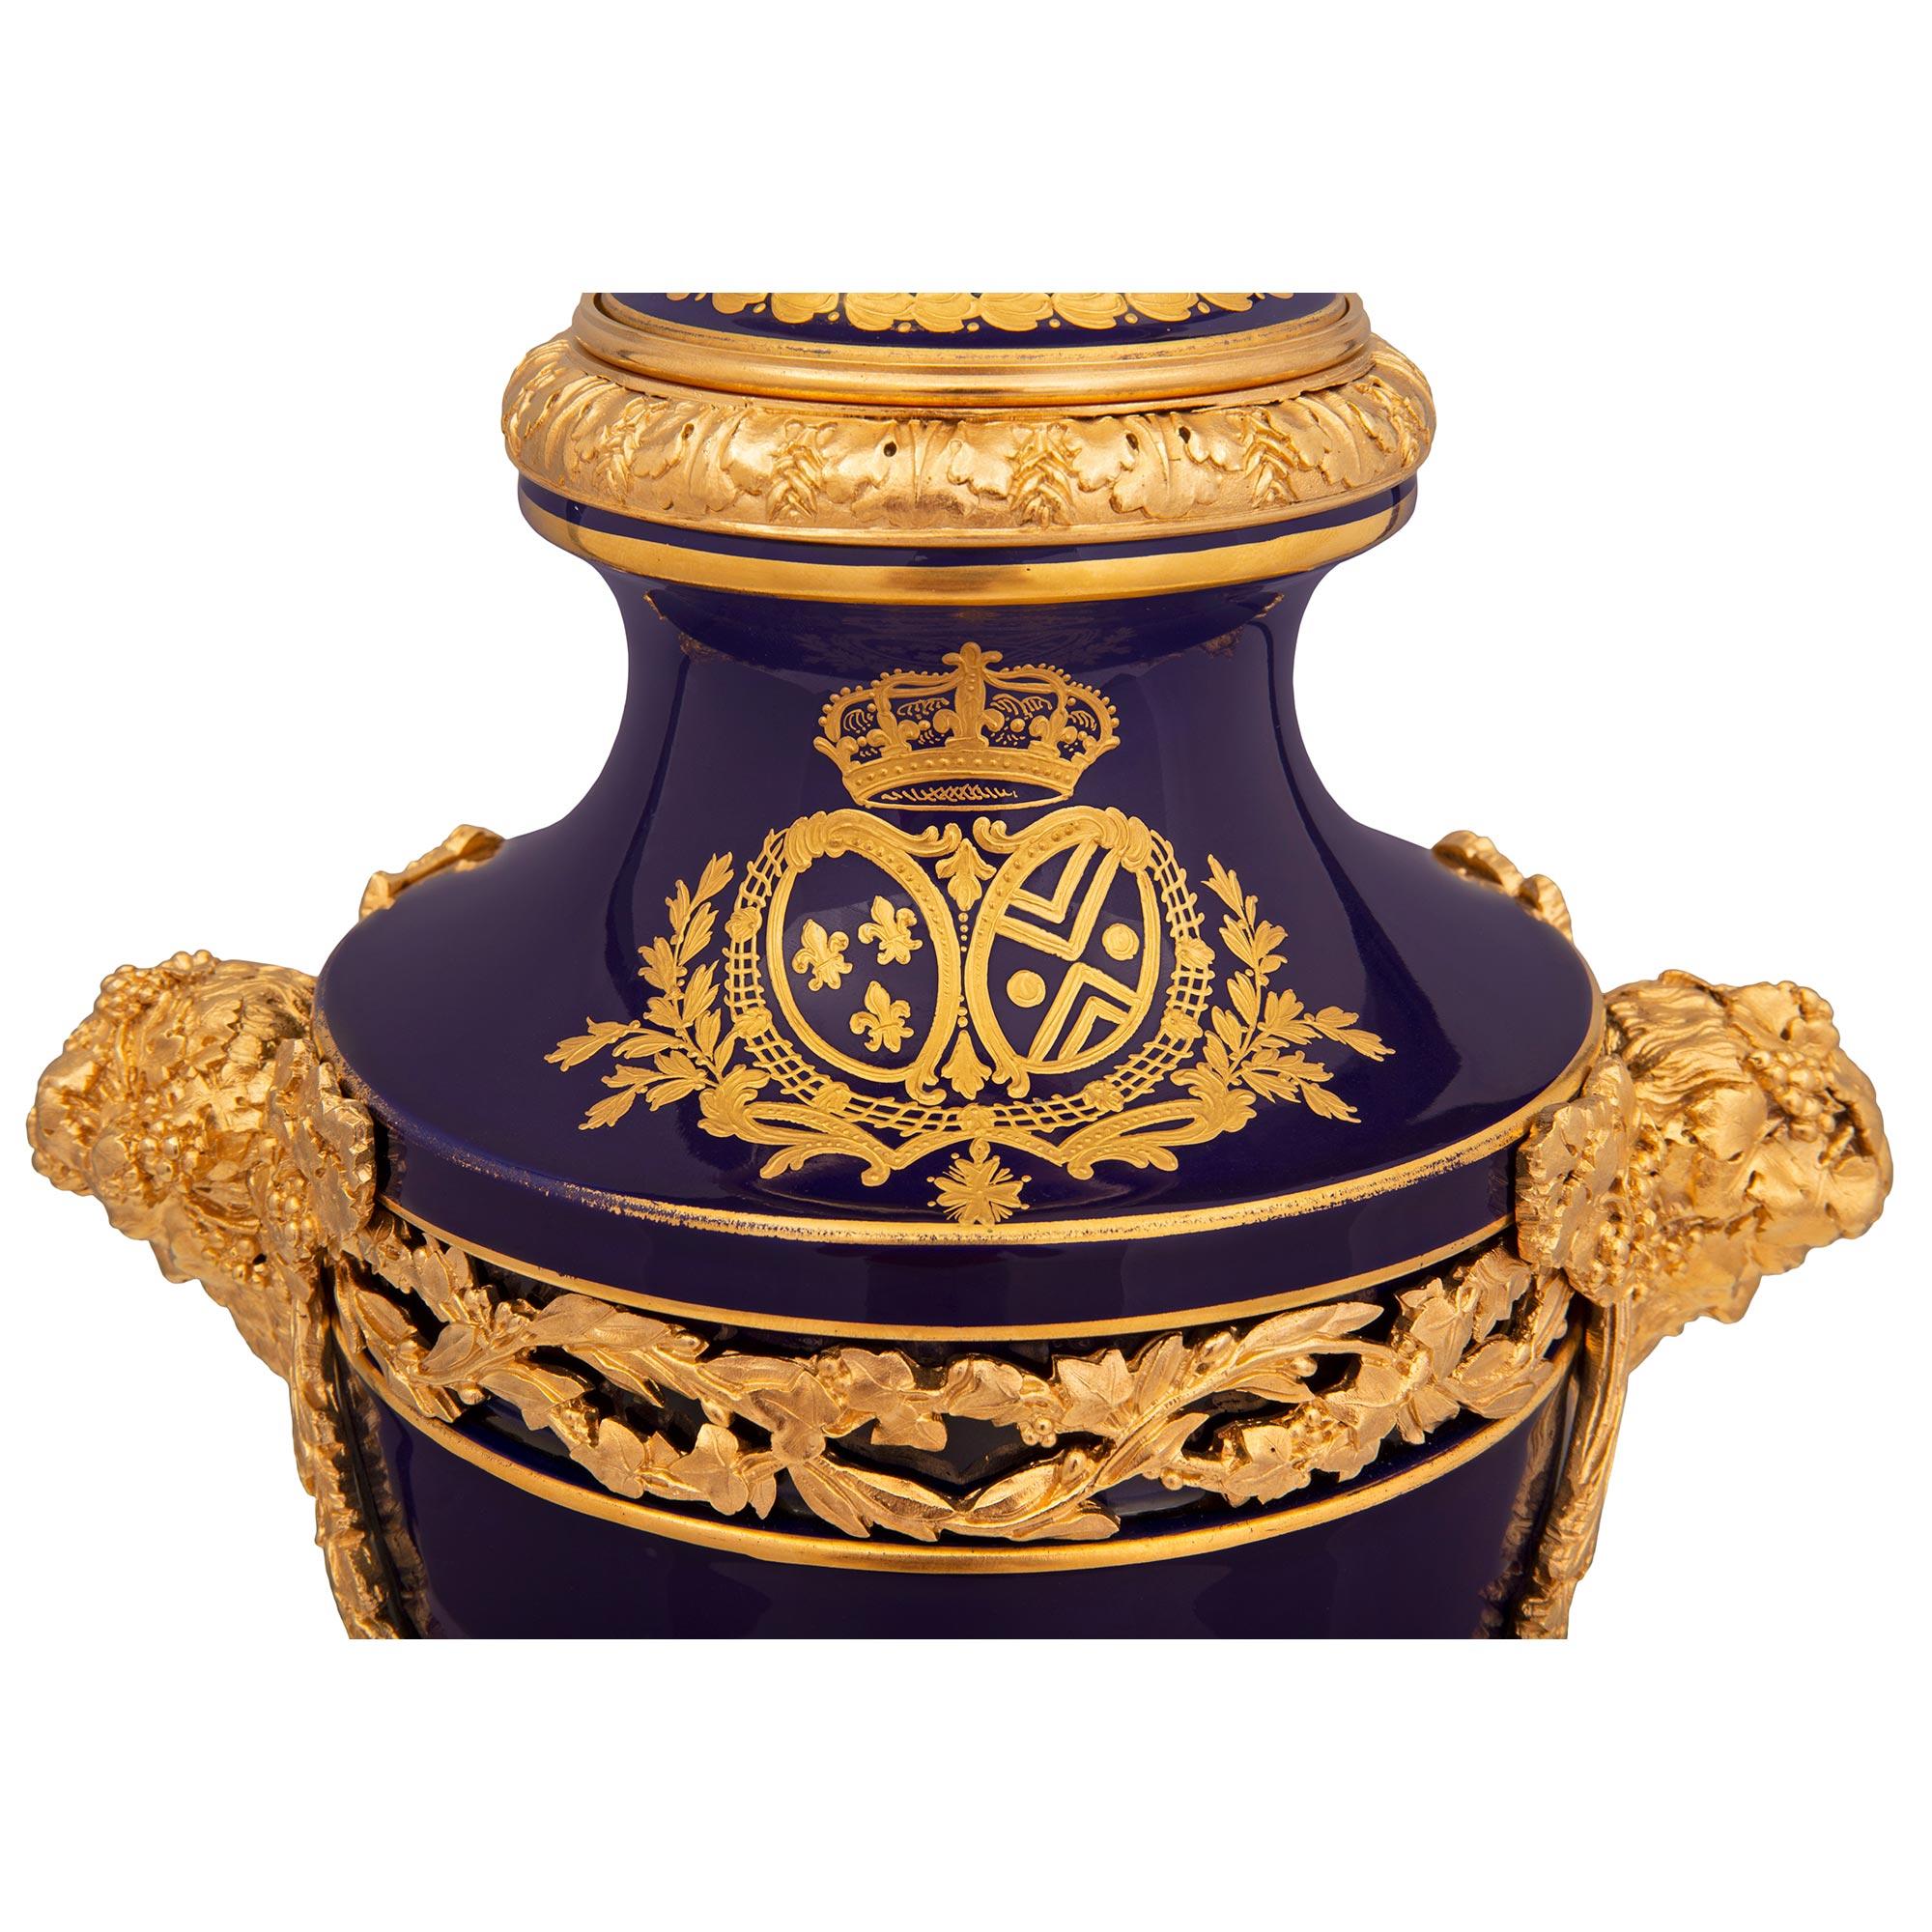 French 19th Century Louis XVI St. Sèvres Porcelain and Ormolu Lidded Urn For Sale 4